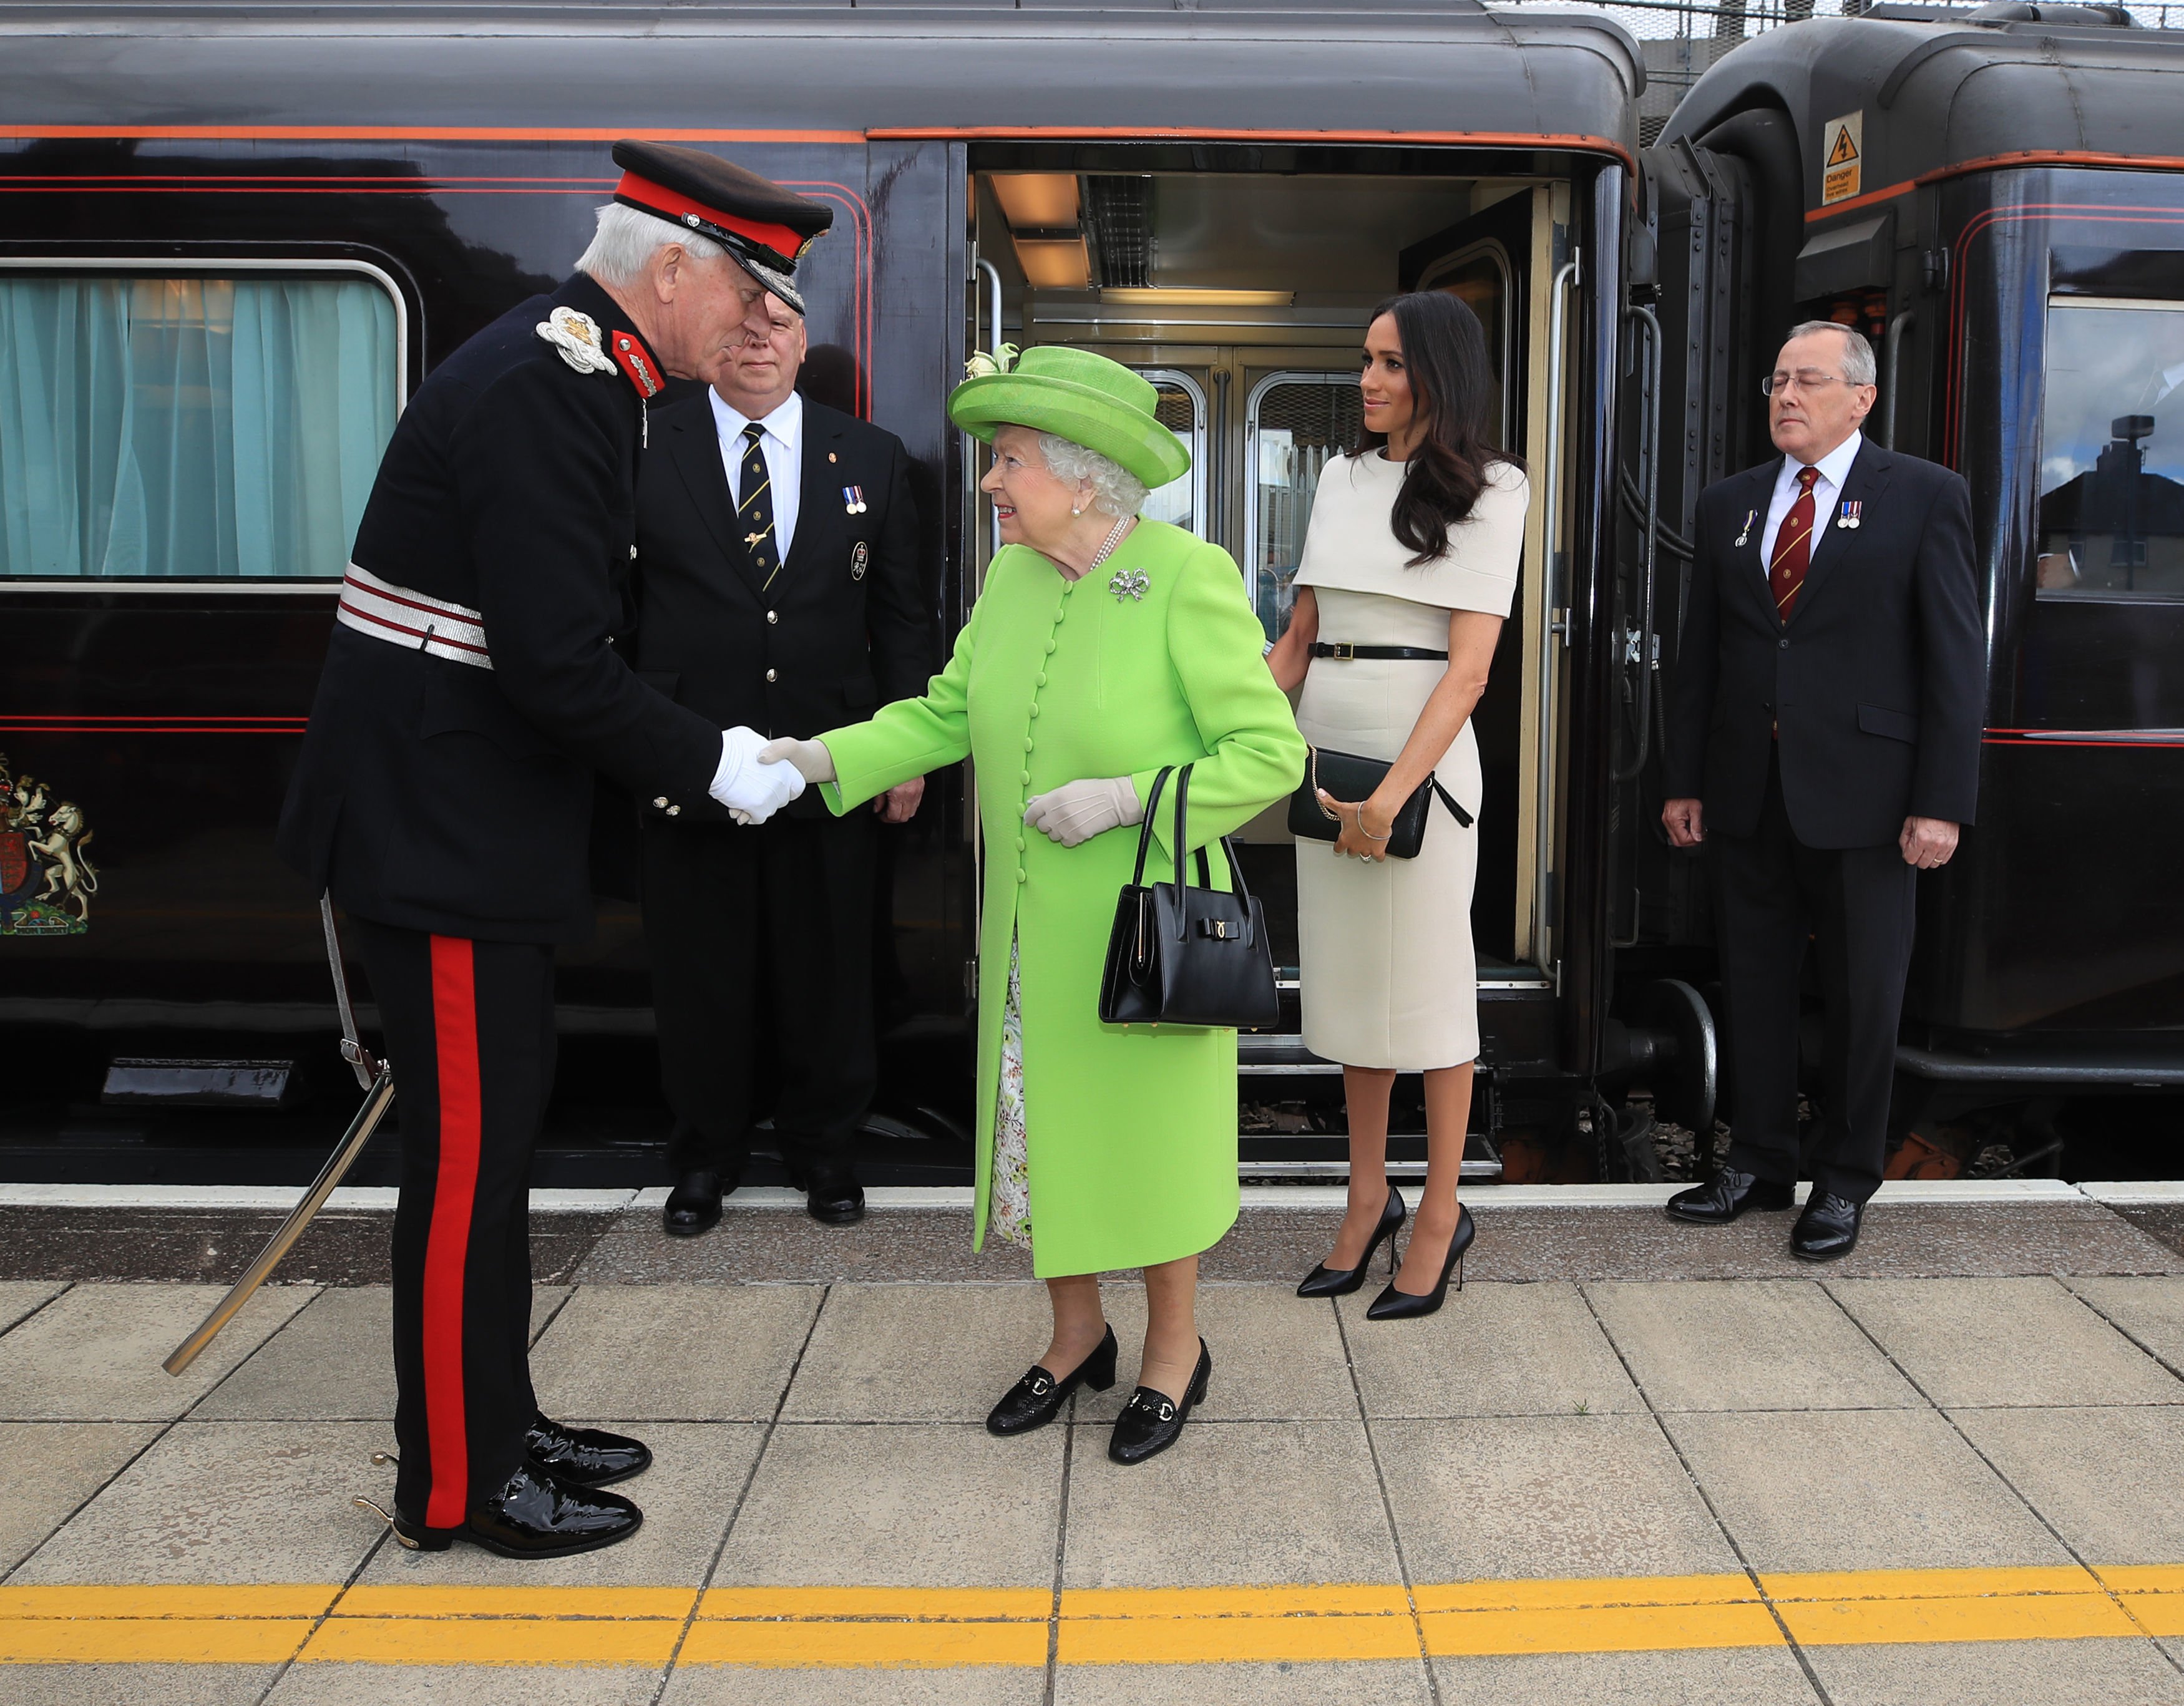 Queen Elizabeth II is greeted with Duchess Meghan as they arrive by Royal Train at Runcorn Station to open the new Mersey Gateway Bridge on June 14, 2018, in Runcorn, Cheshire, England | Source: Getty Images